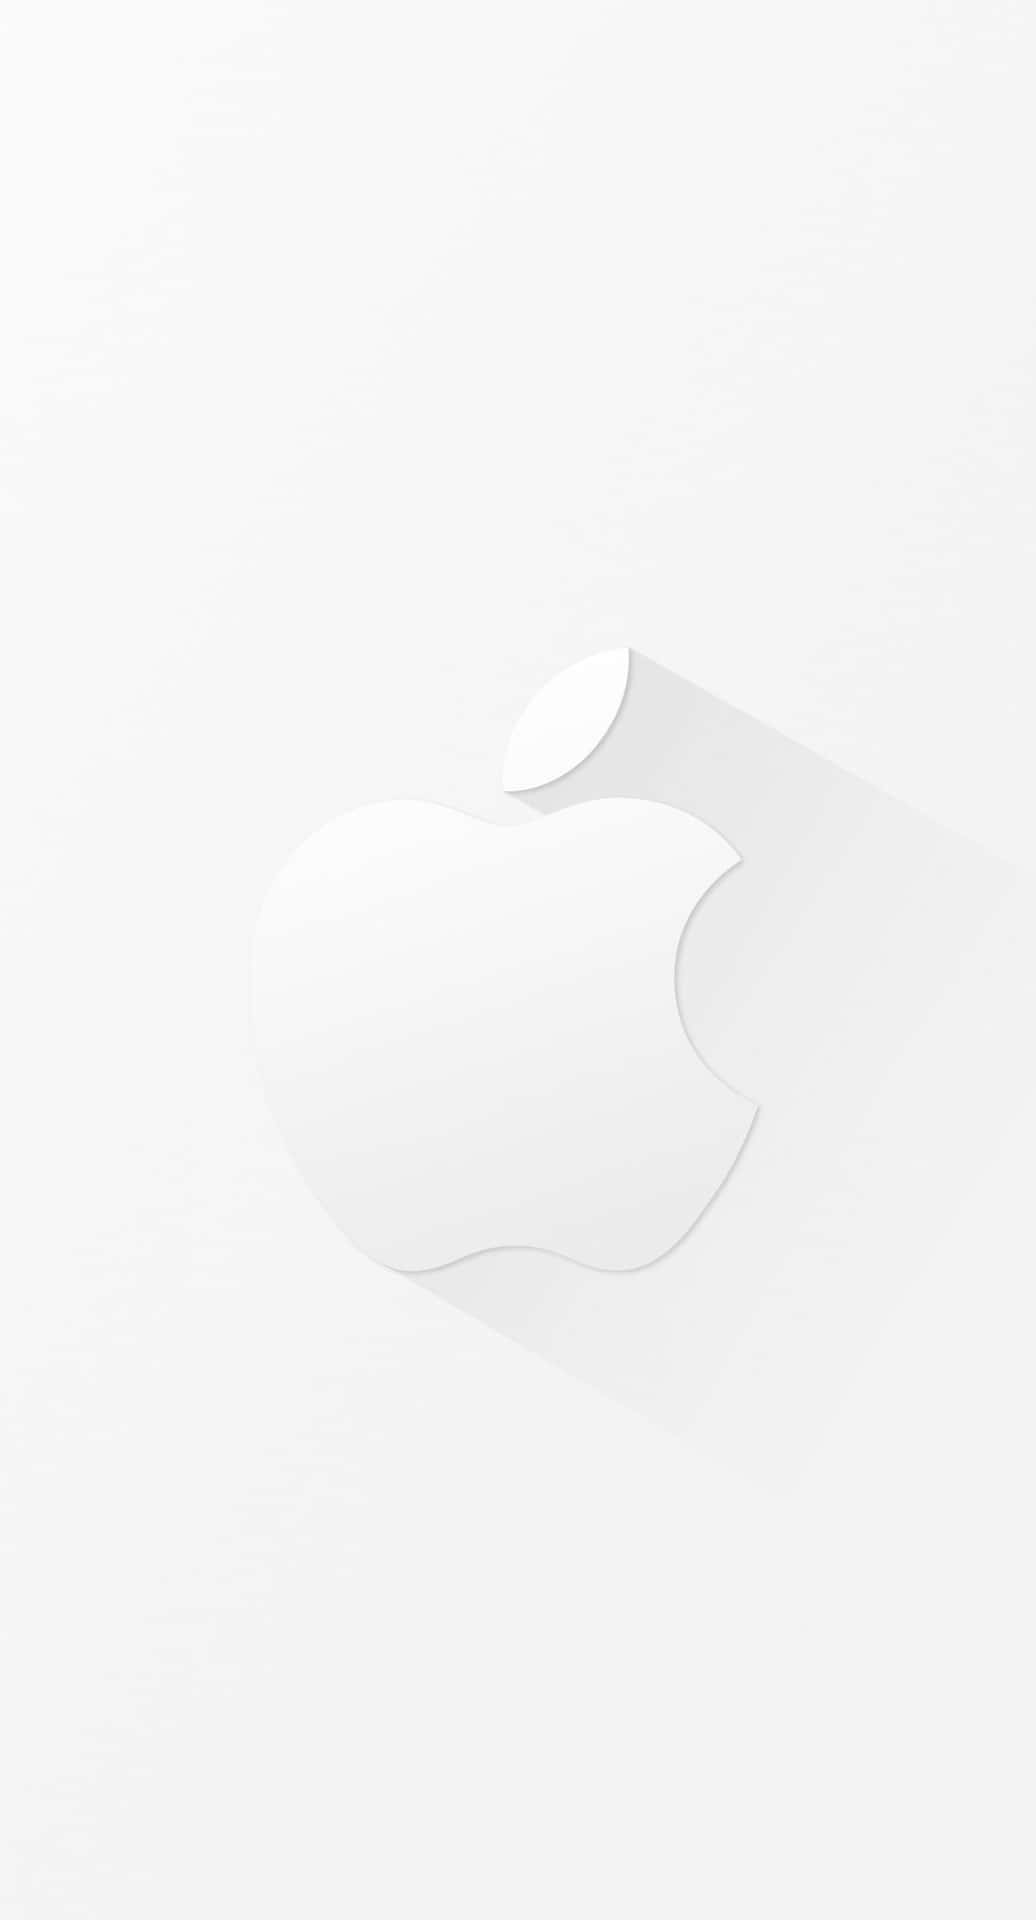 Iphone White Apple Logo Picture